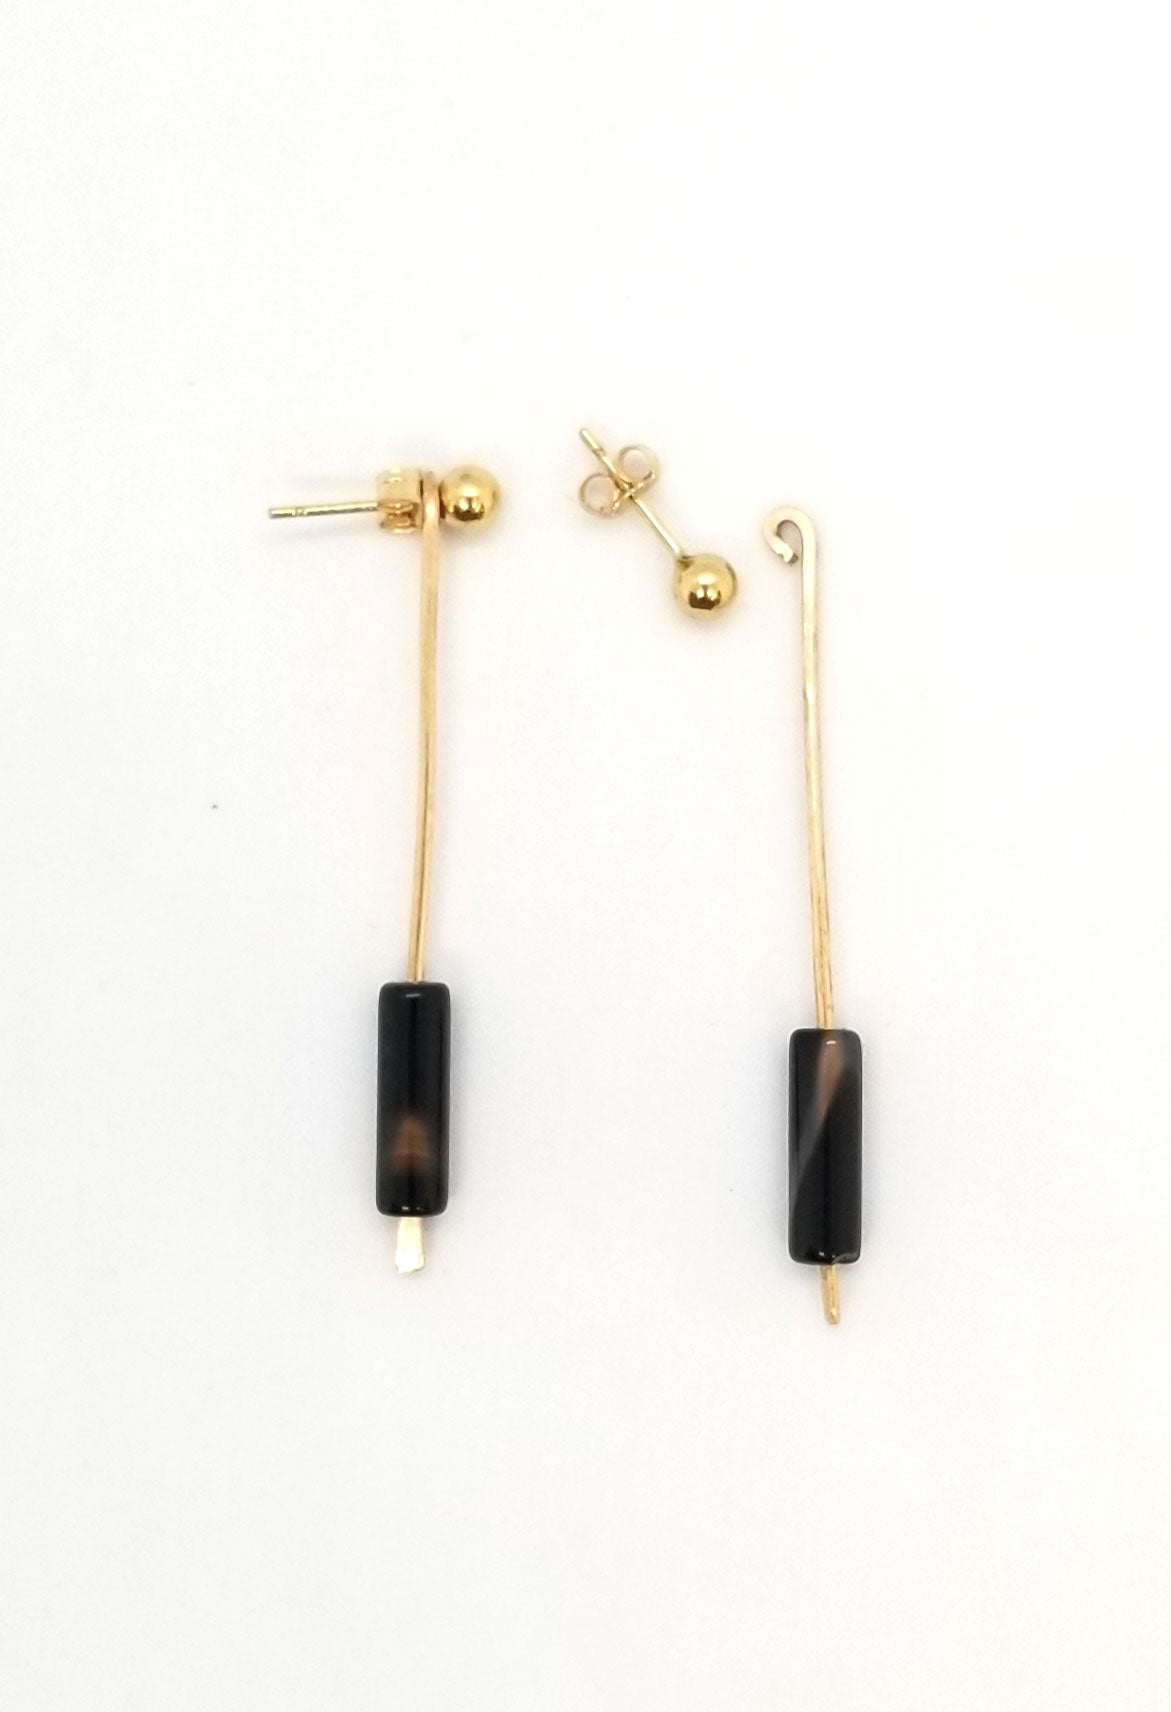 The Onyx - Gold, Bronze and Onyx Earrings